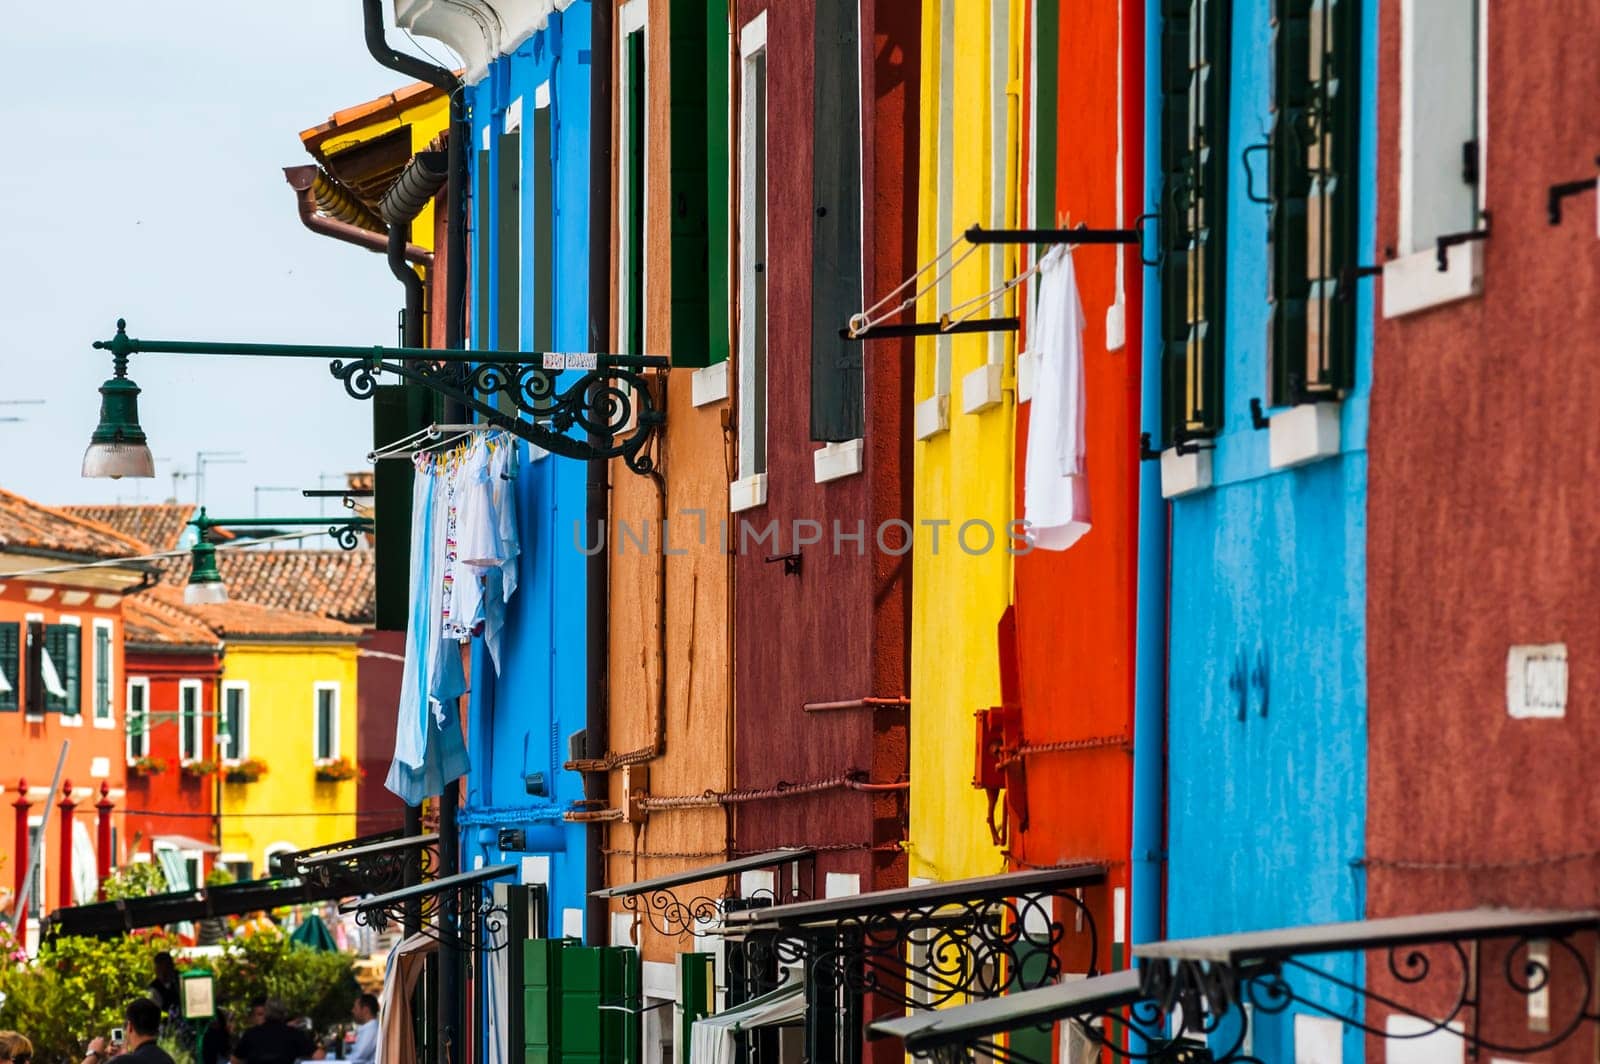 The island of Burano in the Venetian lagoon famous for its brightly colored houses